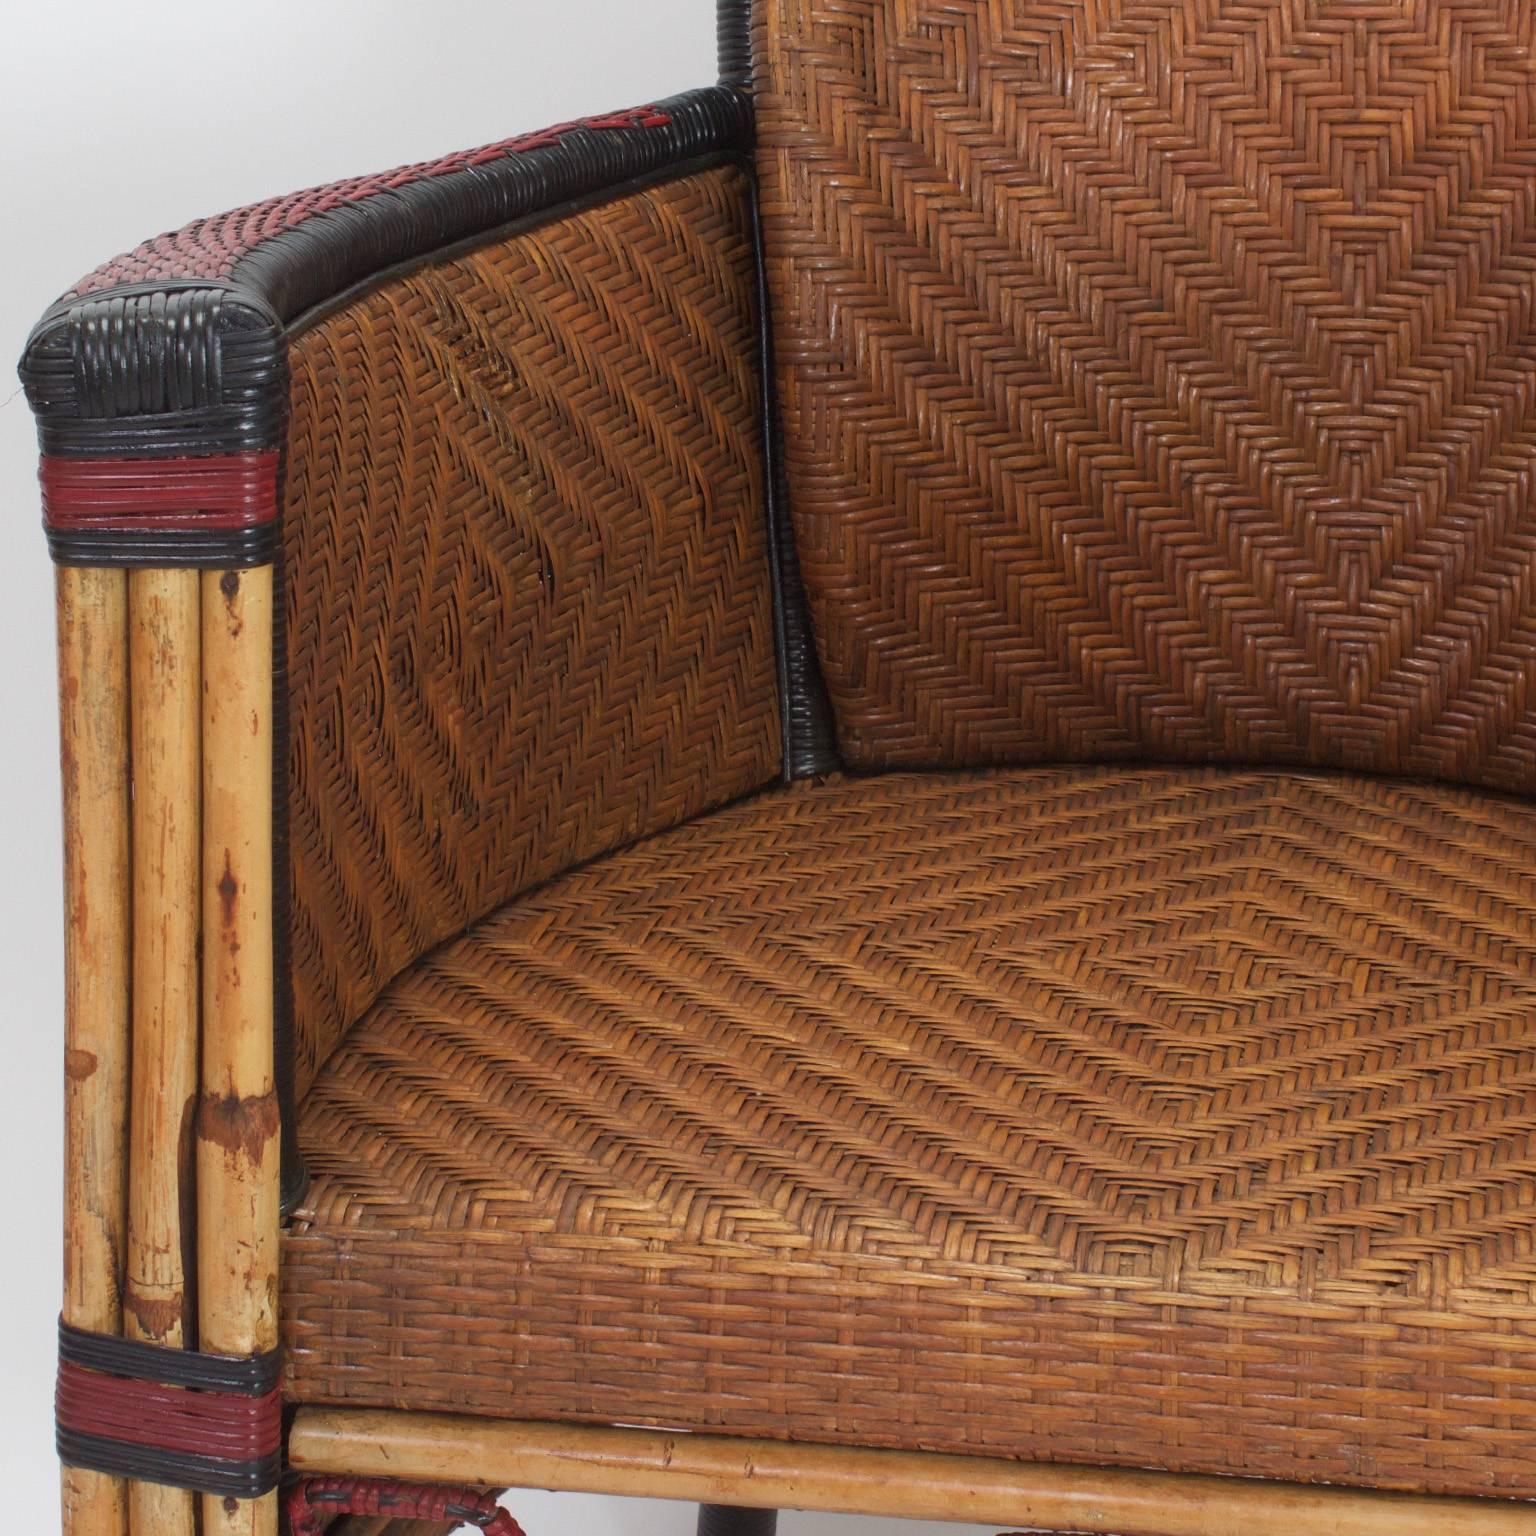 20th Century Pair of Rare Woven Cane Armchairs with Painted Backs